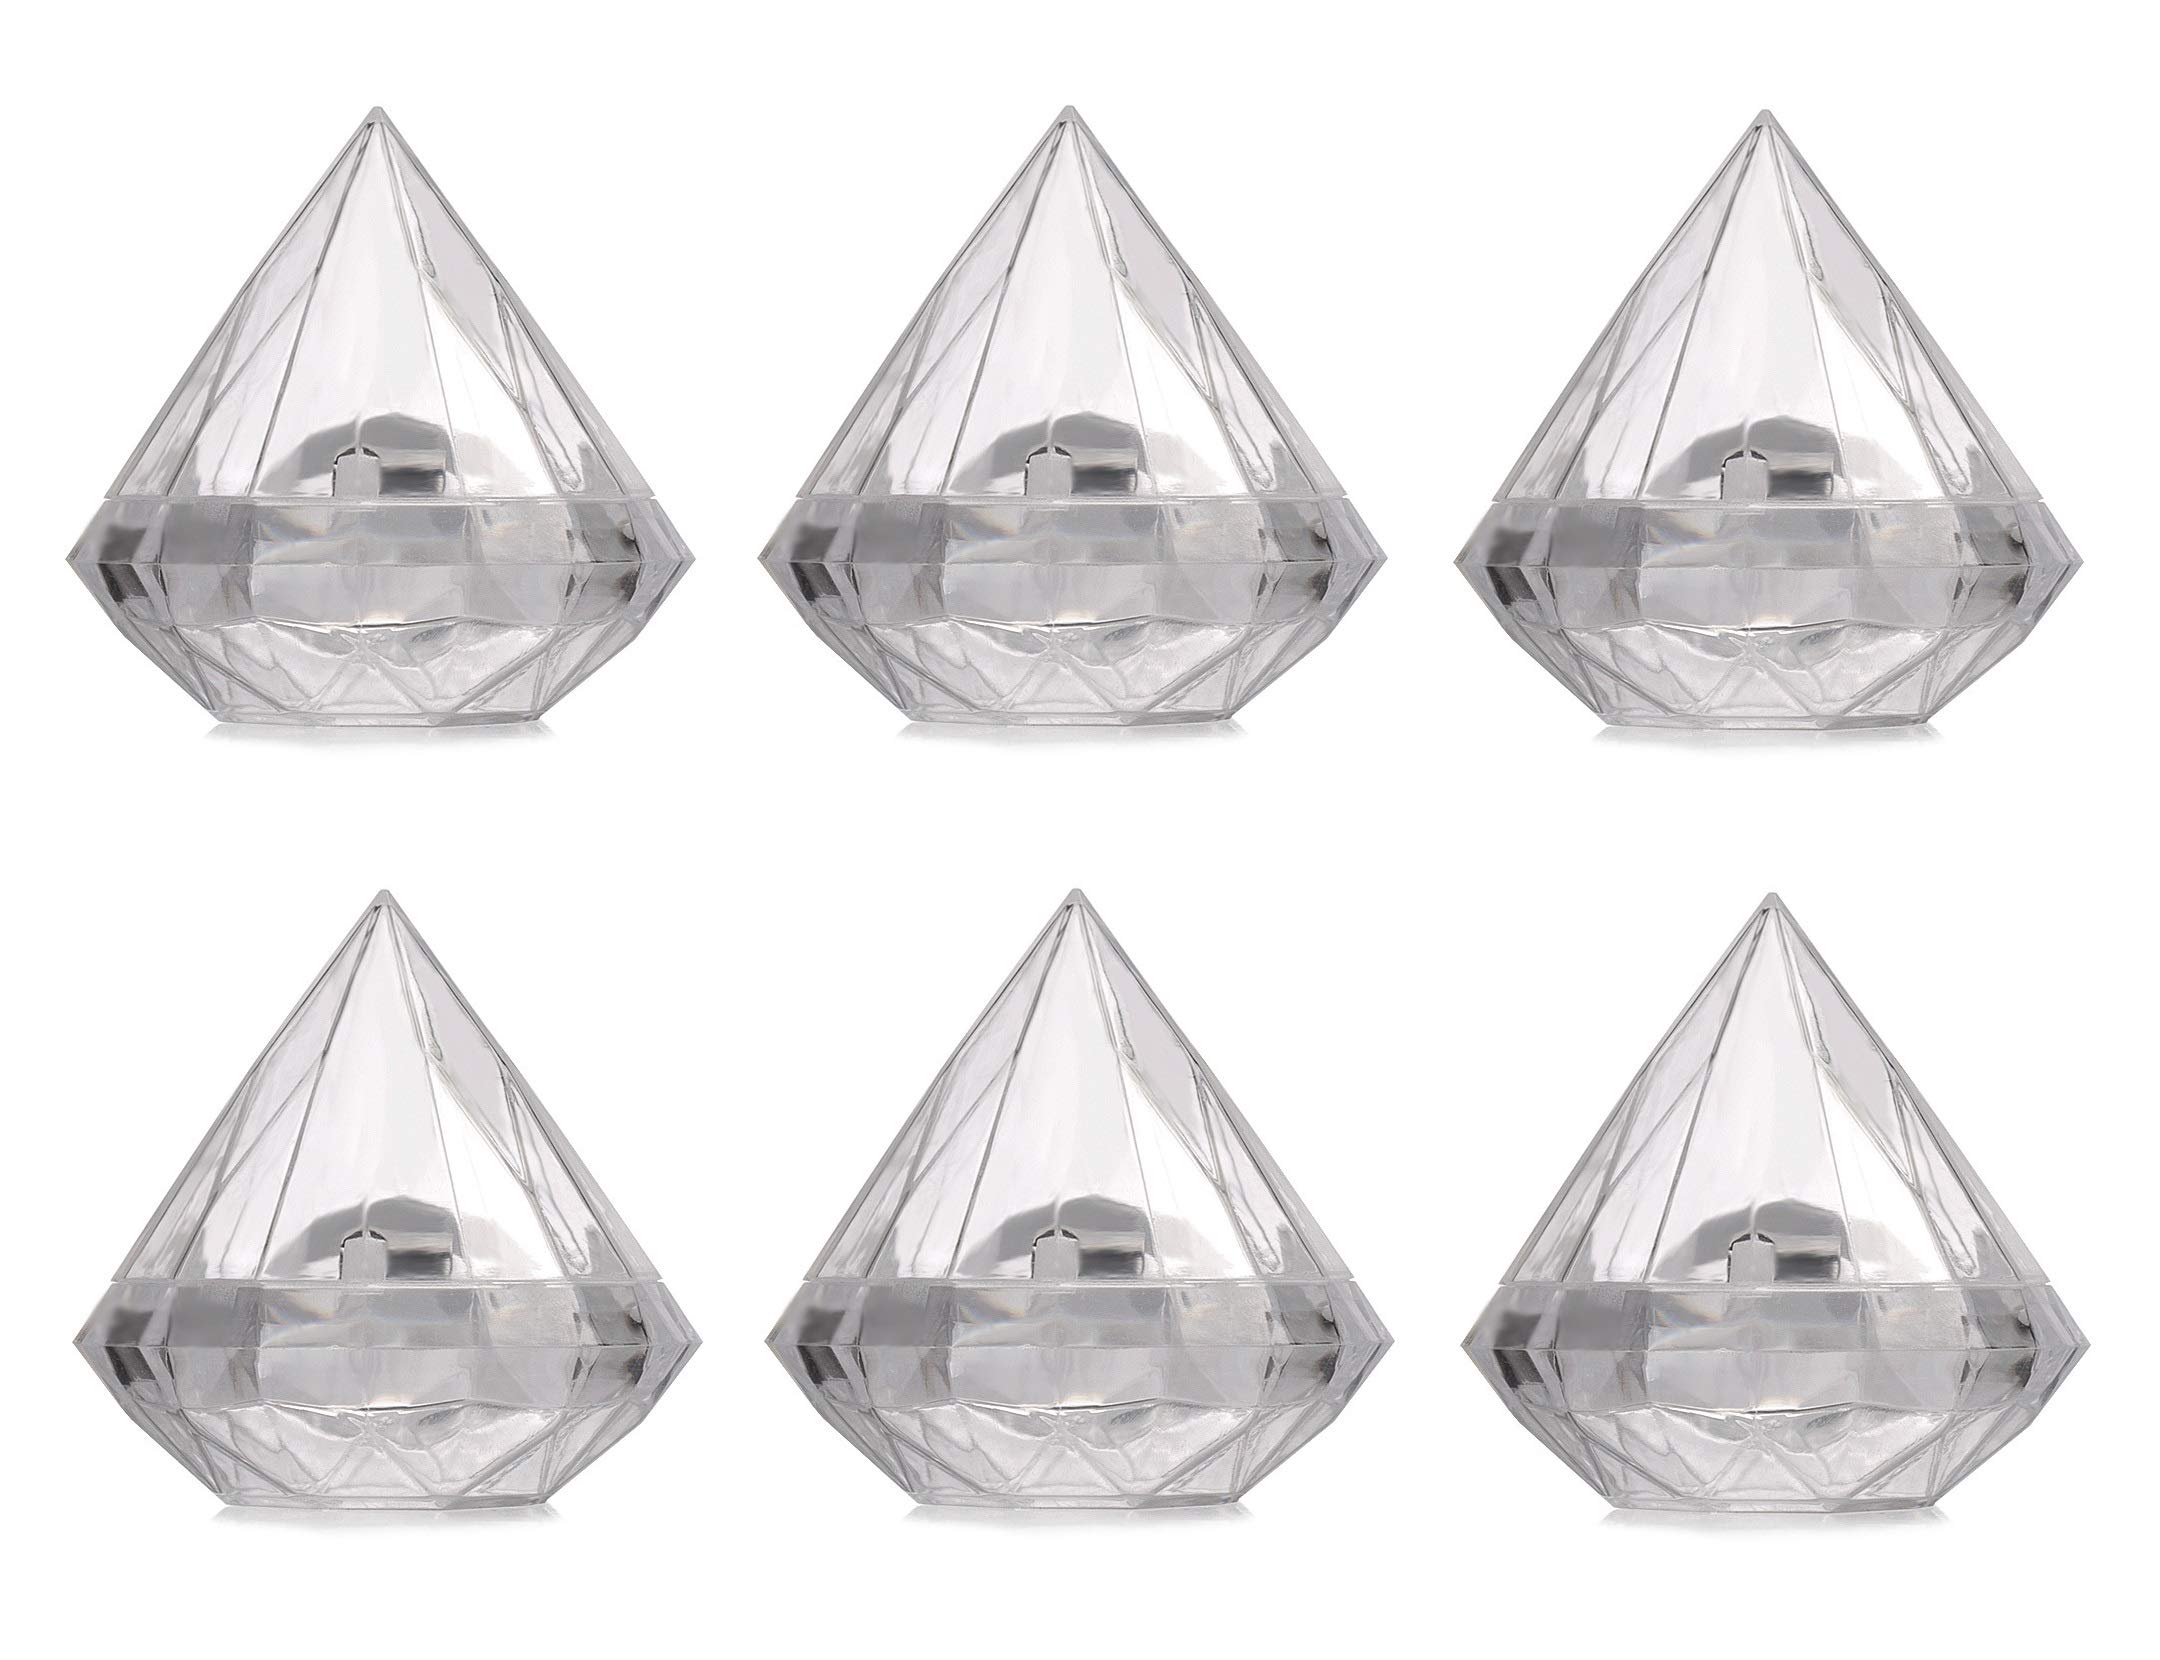 6 Pack Clear Diamond Shape Ornaments - Clear Plastic Fillable Ornaments - Christmas Fillable Ornaments, Bath Bomb Ornaments, Hollow Ornaments for Wedding Party Decoration, Craft Art, Holiday (9CM)